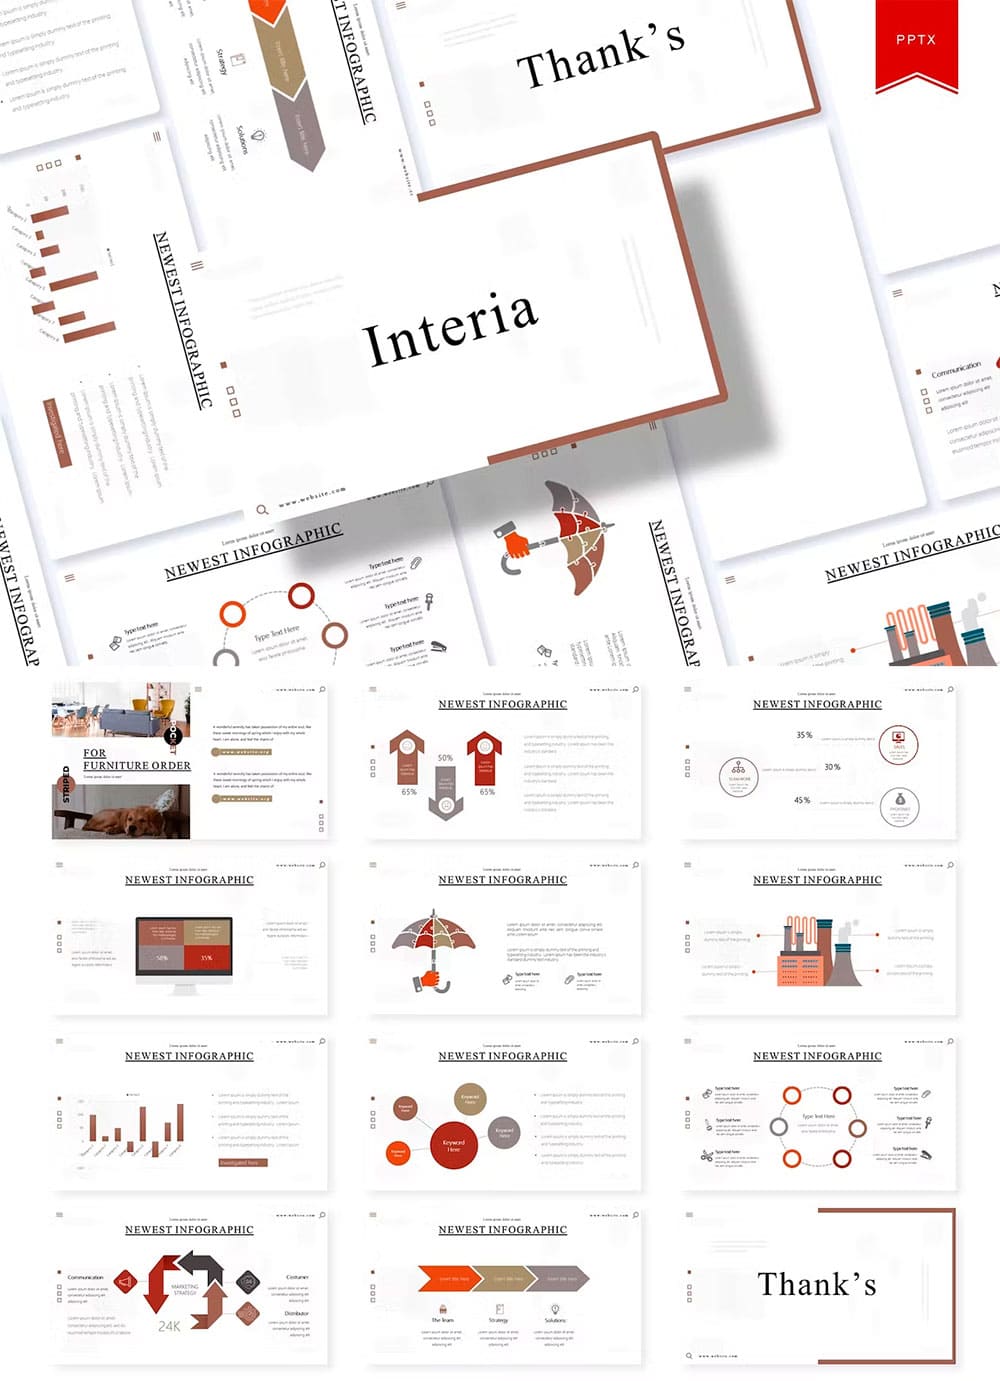 Interia powerpoint template, picture for pinterest.